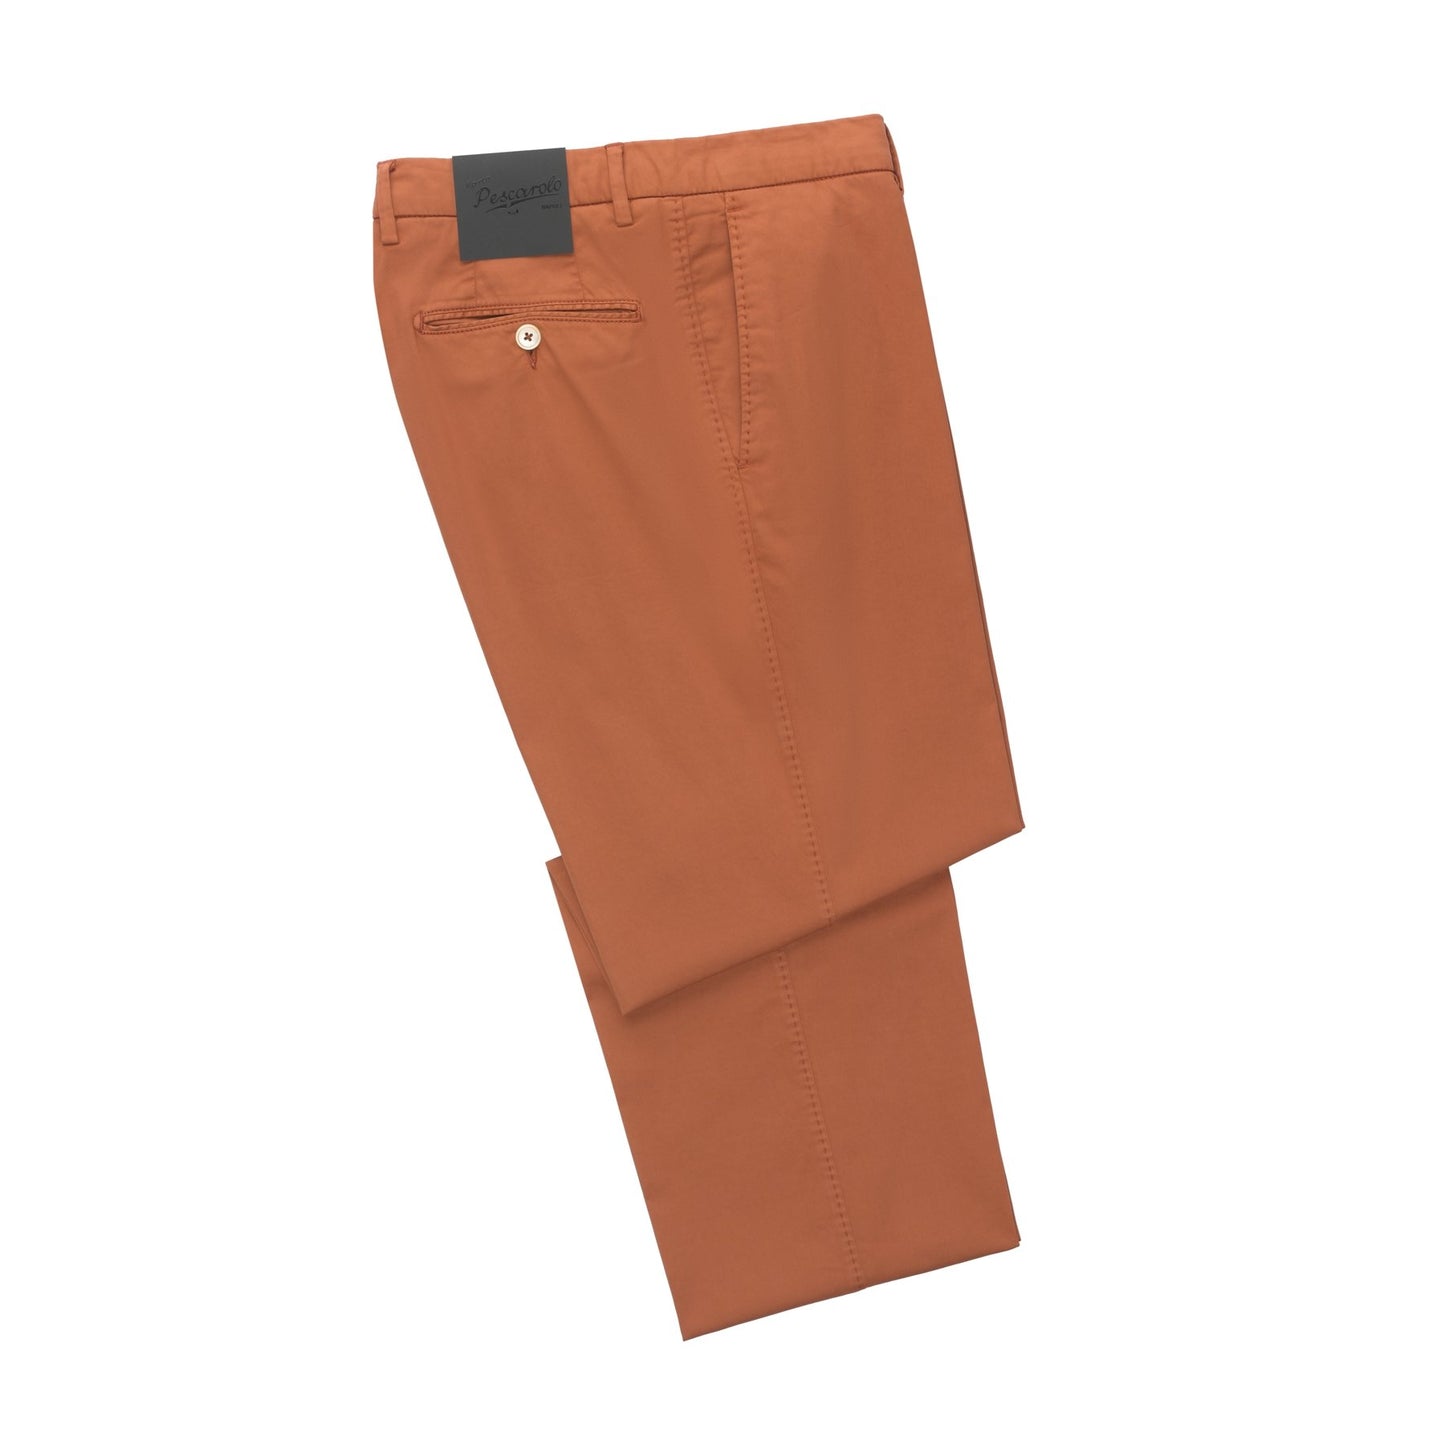 Marco Pescarolo Slim-Fit Cotton-Blend Trousers in Brick Red - SARTALE